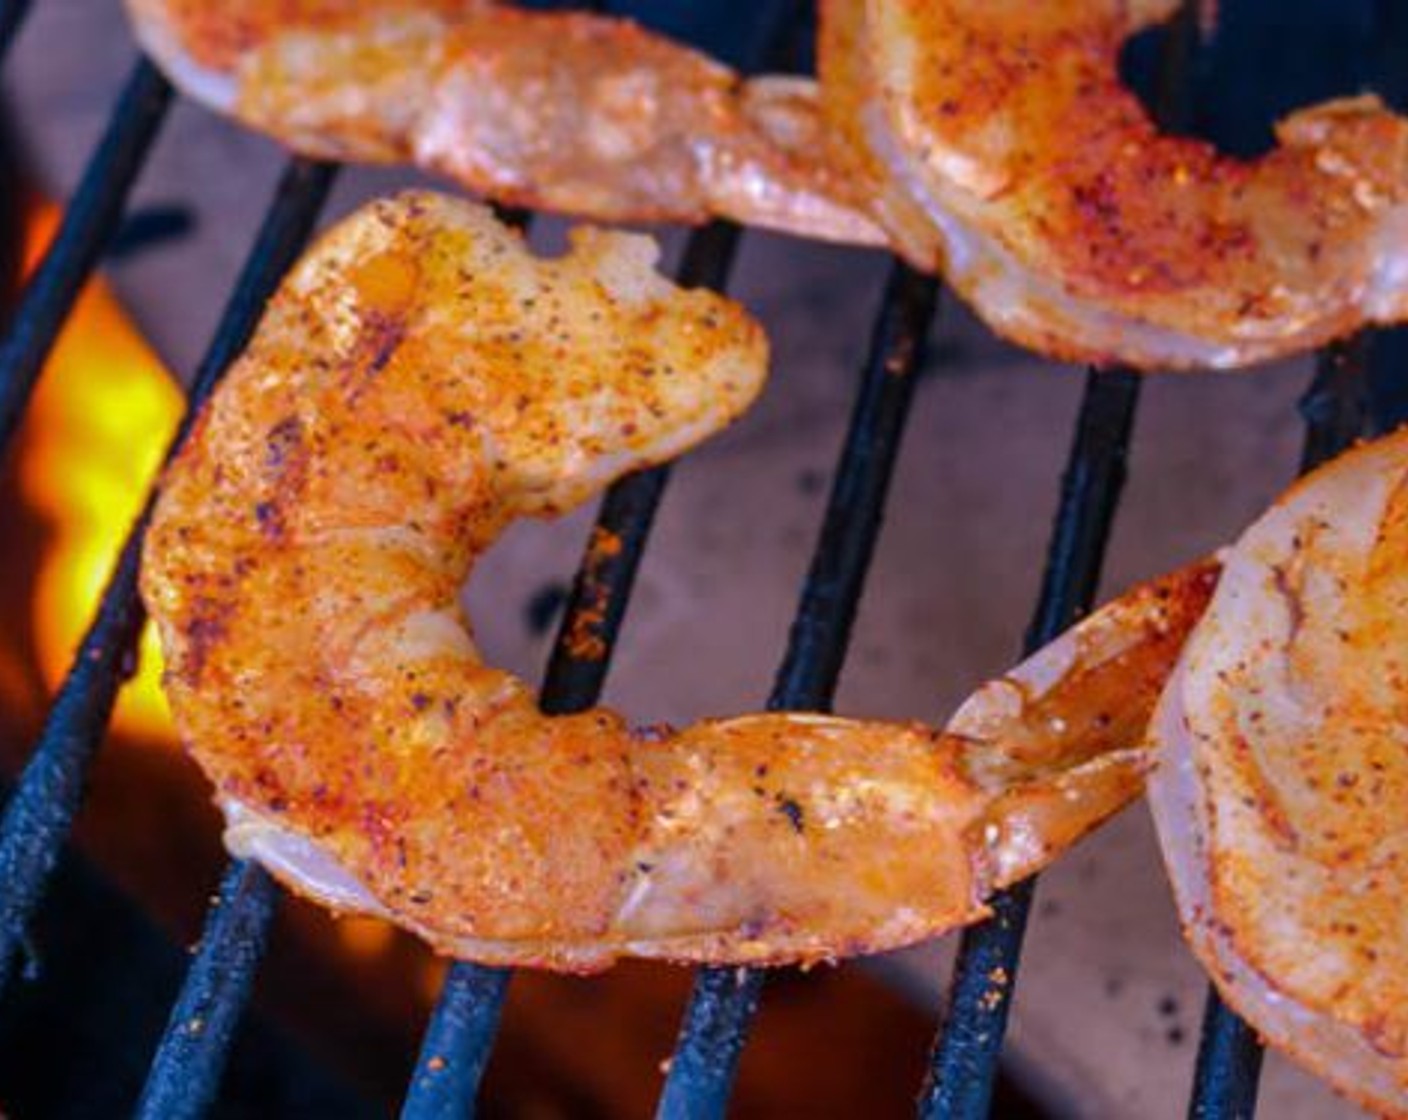 step 7 Place seasoned shrimp on grill for 1 1/2 minutes each side. Add shrimp to the iron skillet and toss to coat. Cook the shrimp in the sauce for 1-2 minutes and remove from the grill.